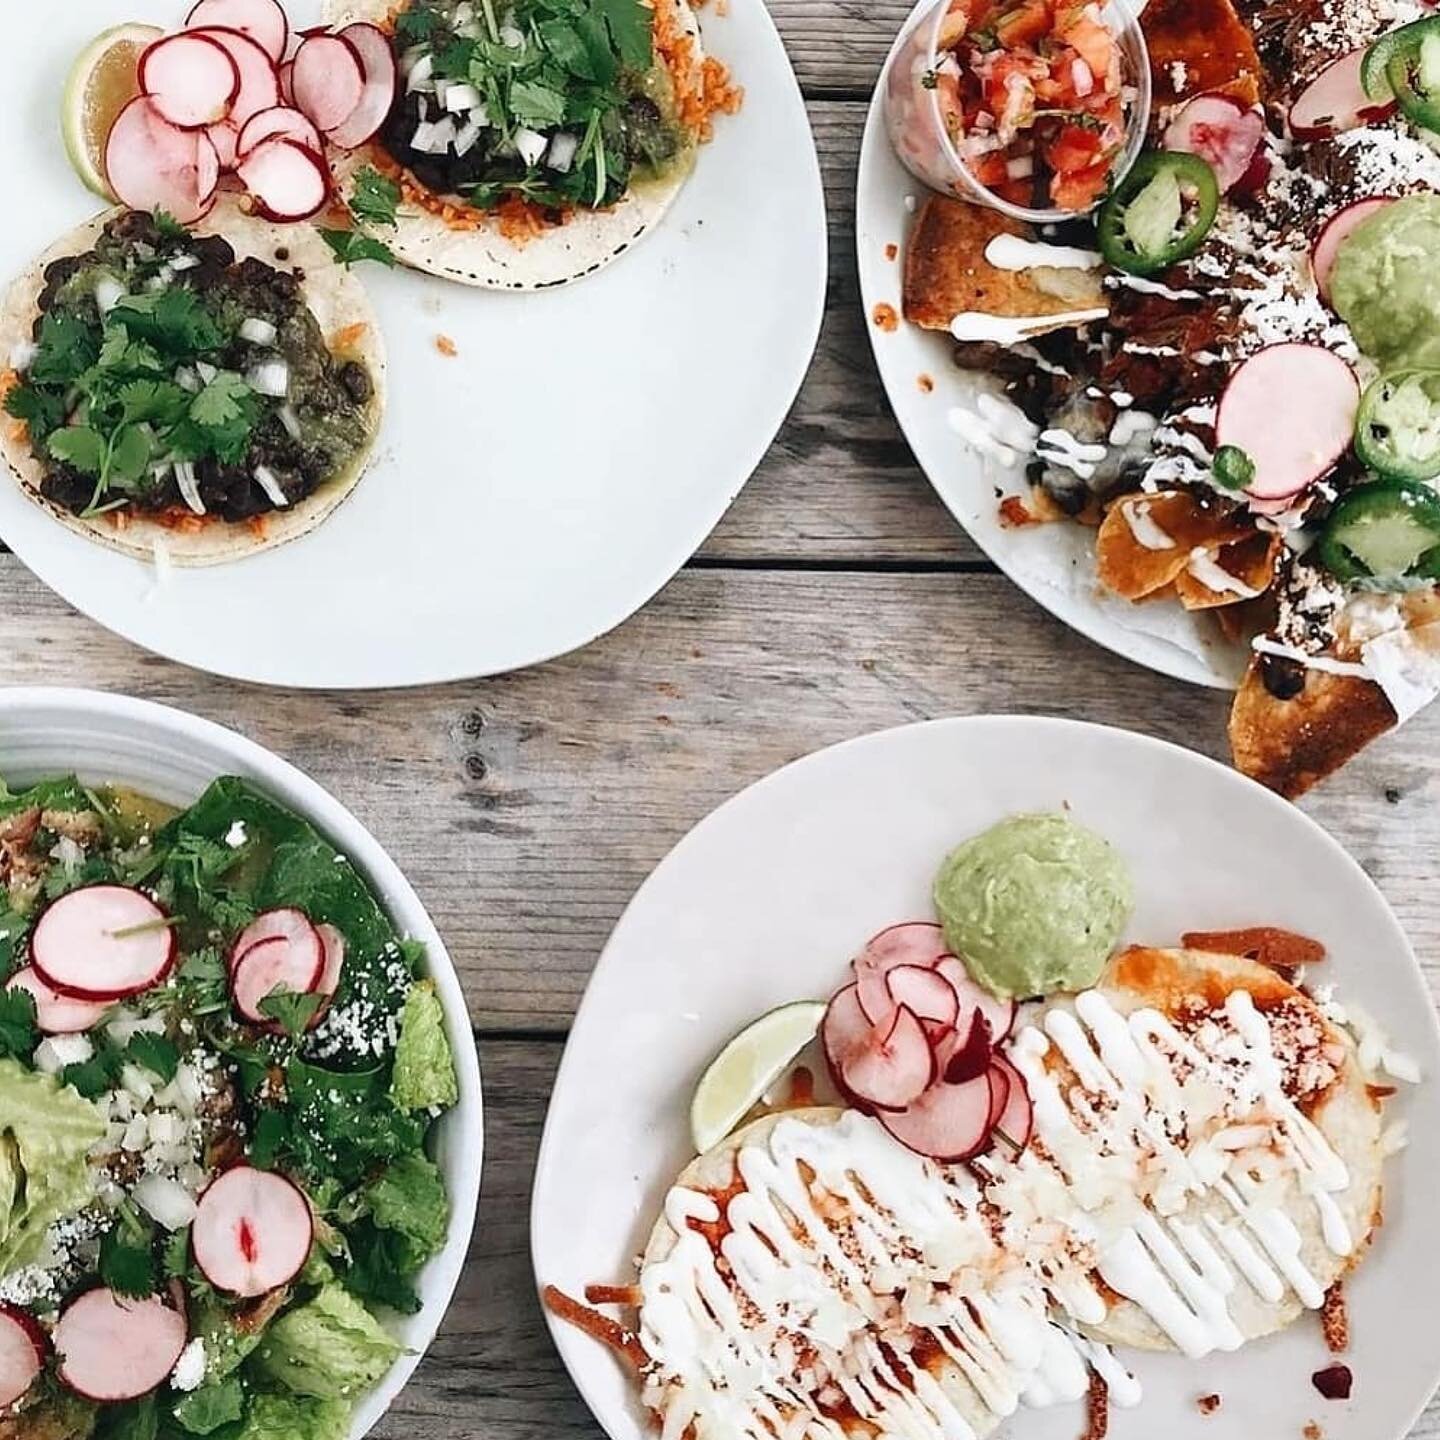 Lunch goals! 
What&rsquo;s your go to?
This is how @westelmprovidence rolls!
✌️🧡🌮

📸: @westelmprovidence

.
.
.

#tallulahstaqueria #tallulahstacos #providence #pvdeats #providencefoodie #newengland #newenglandfoodies #bostontaquerias #cteats #bos